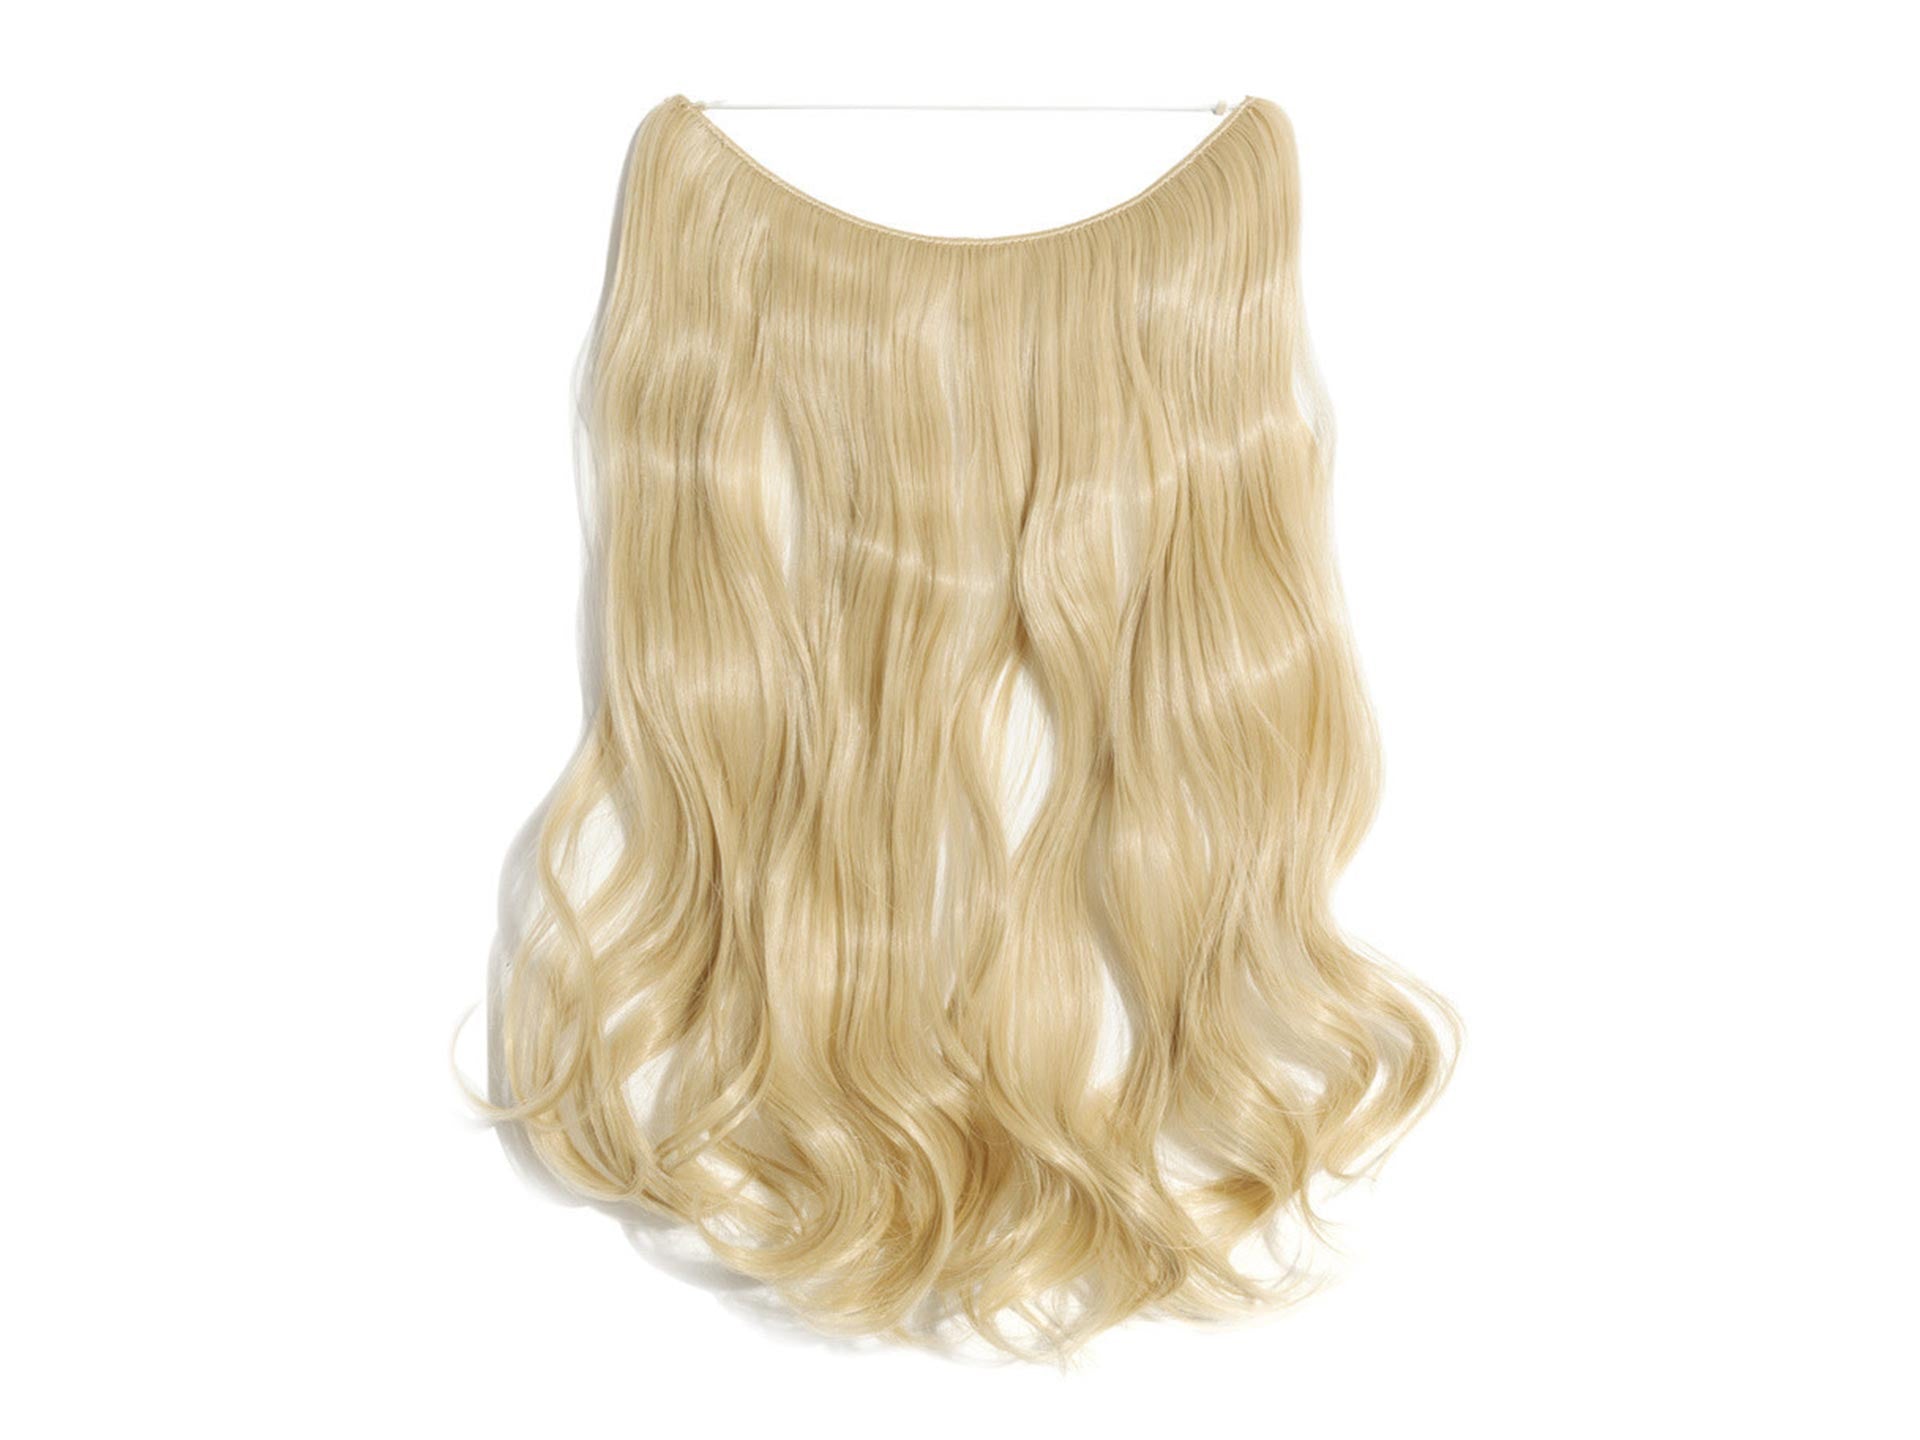 6. Platinum Blonde Hair Wefts - Halo Hair Extensions - wide 4